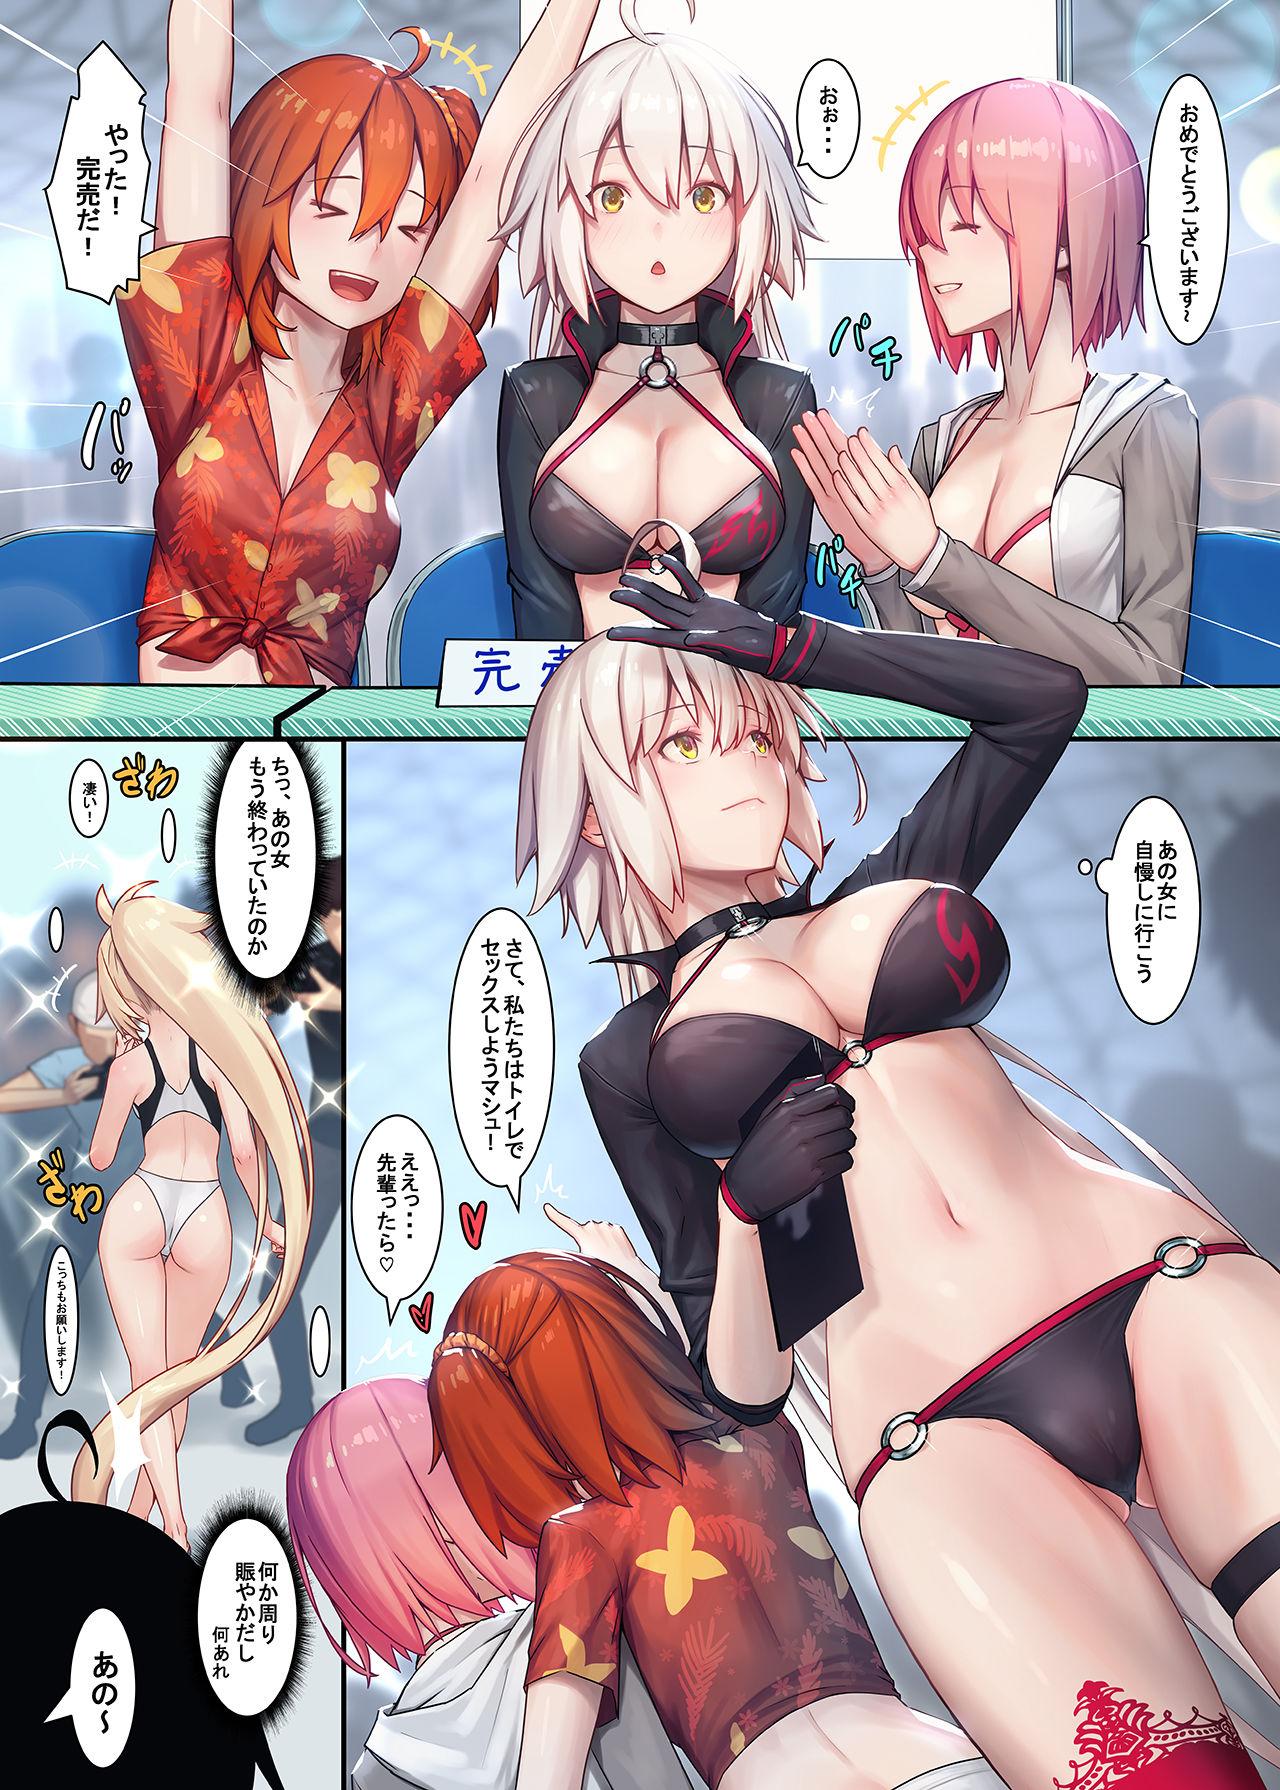 Deep Fate/Gentle Order 4 "Alter" - Fate grand order Costume - Page 3